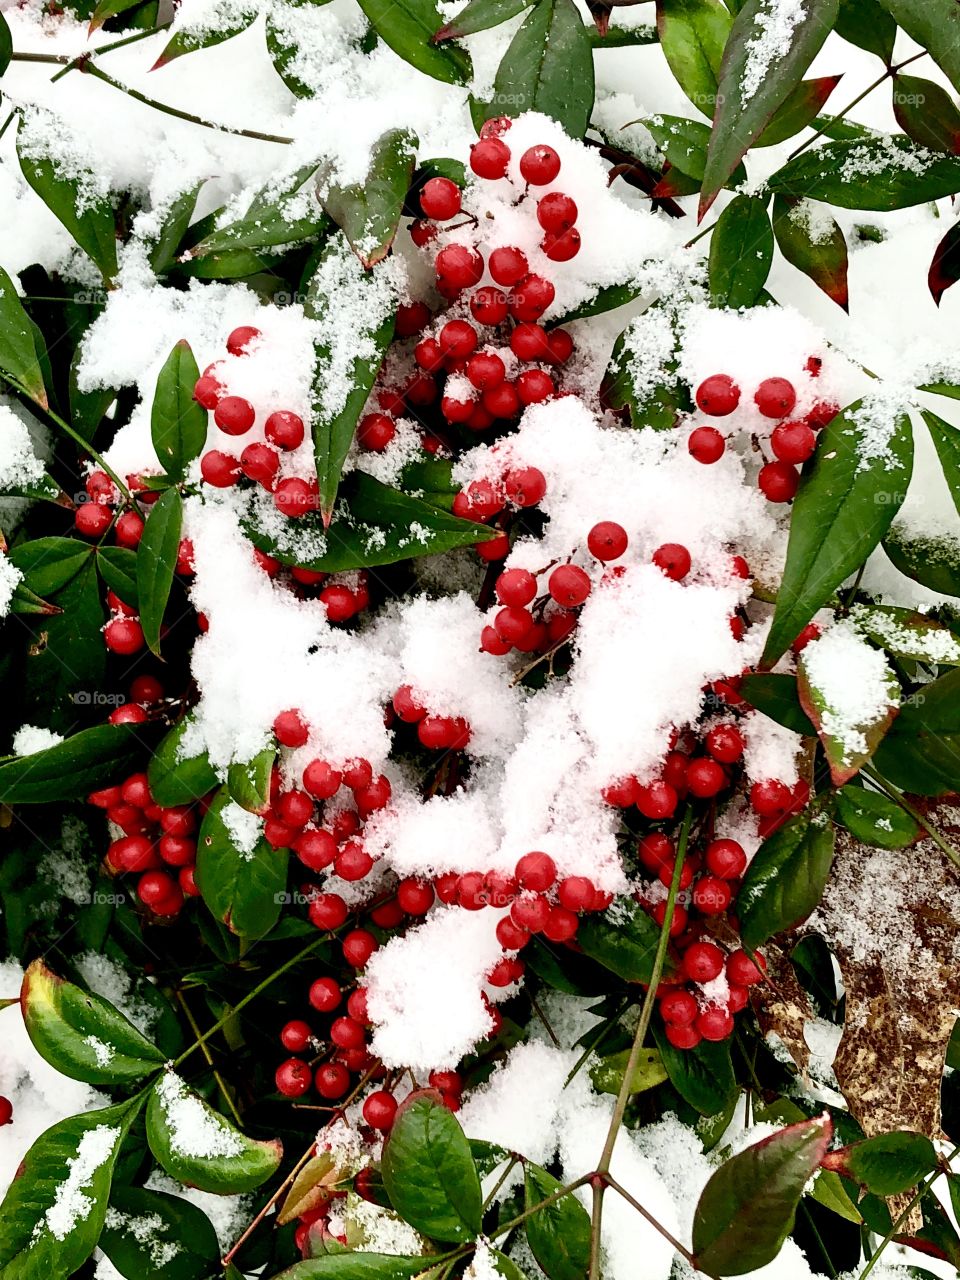 Snow on the berries